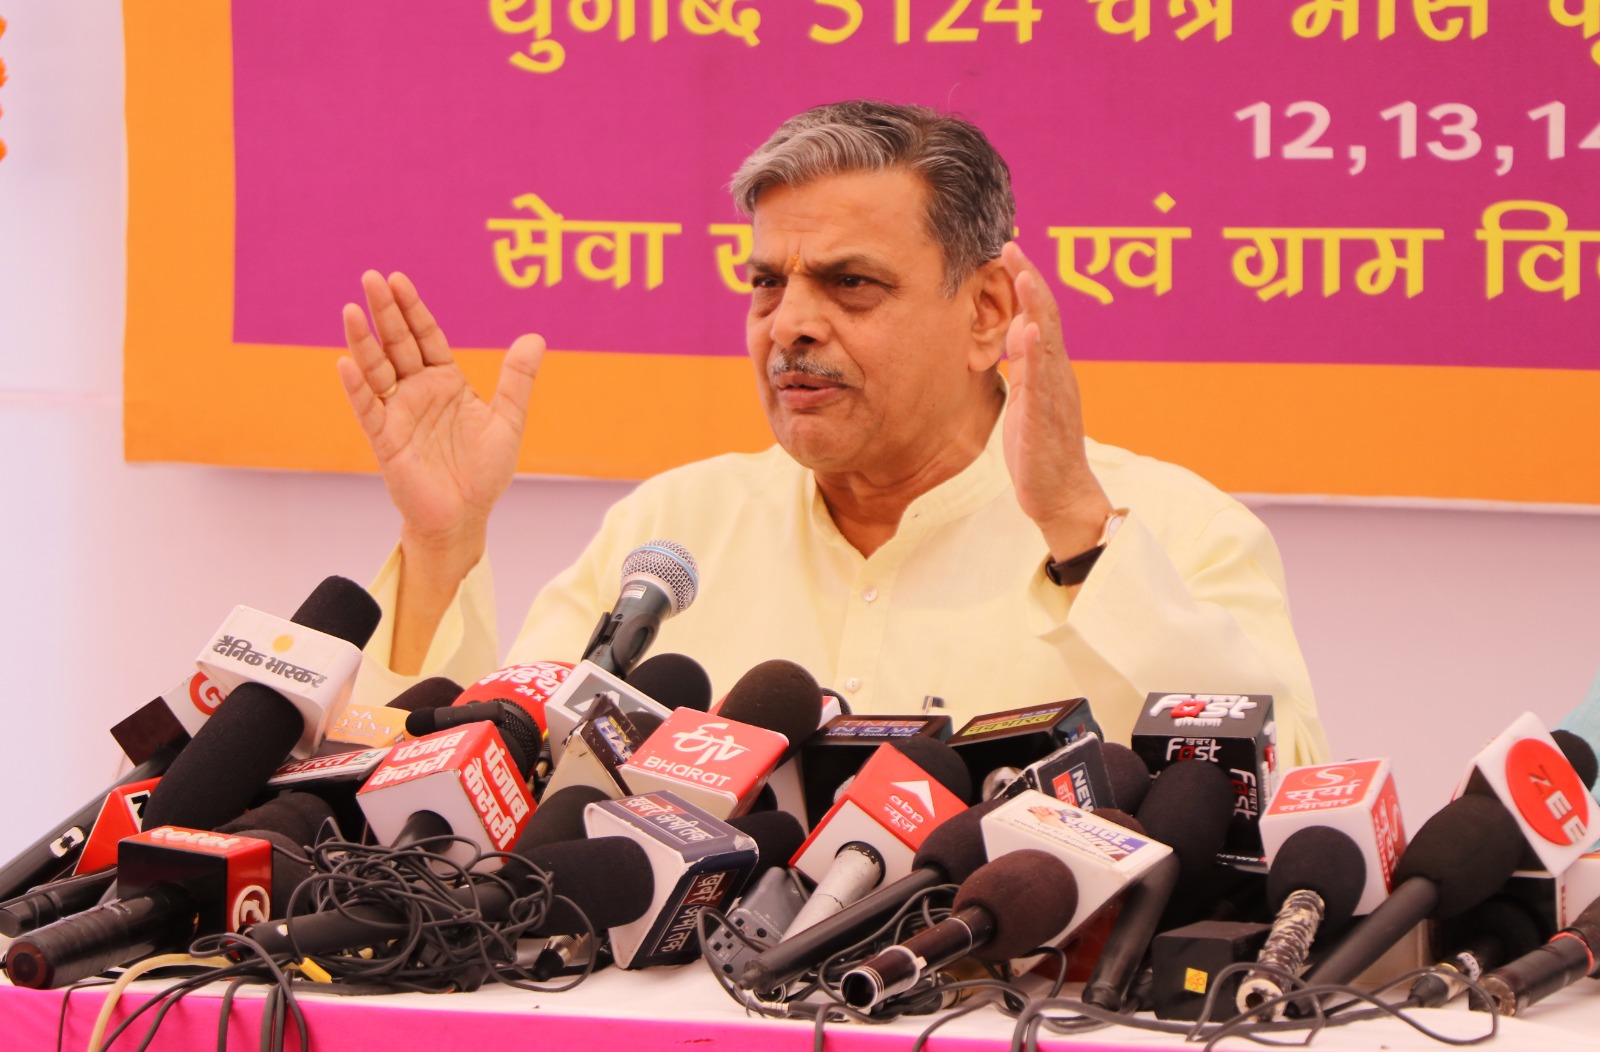 RSS vows to work on five dimensions of social change: Dattatreya Hosabale